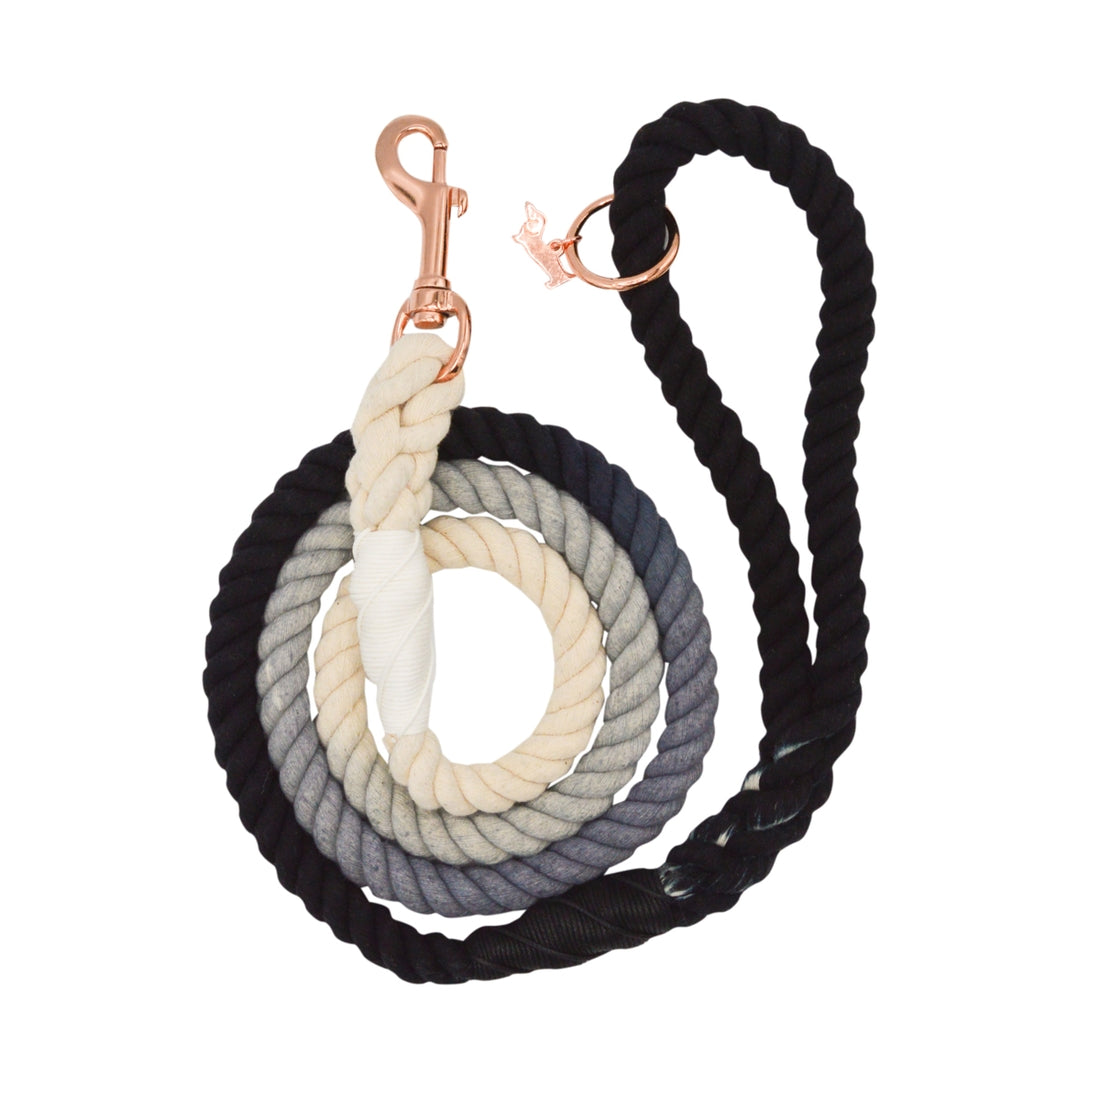 Pet Boutique - Dog Leash - Ombre Black Dog Rope Leash by Sassy Woof